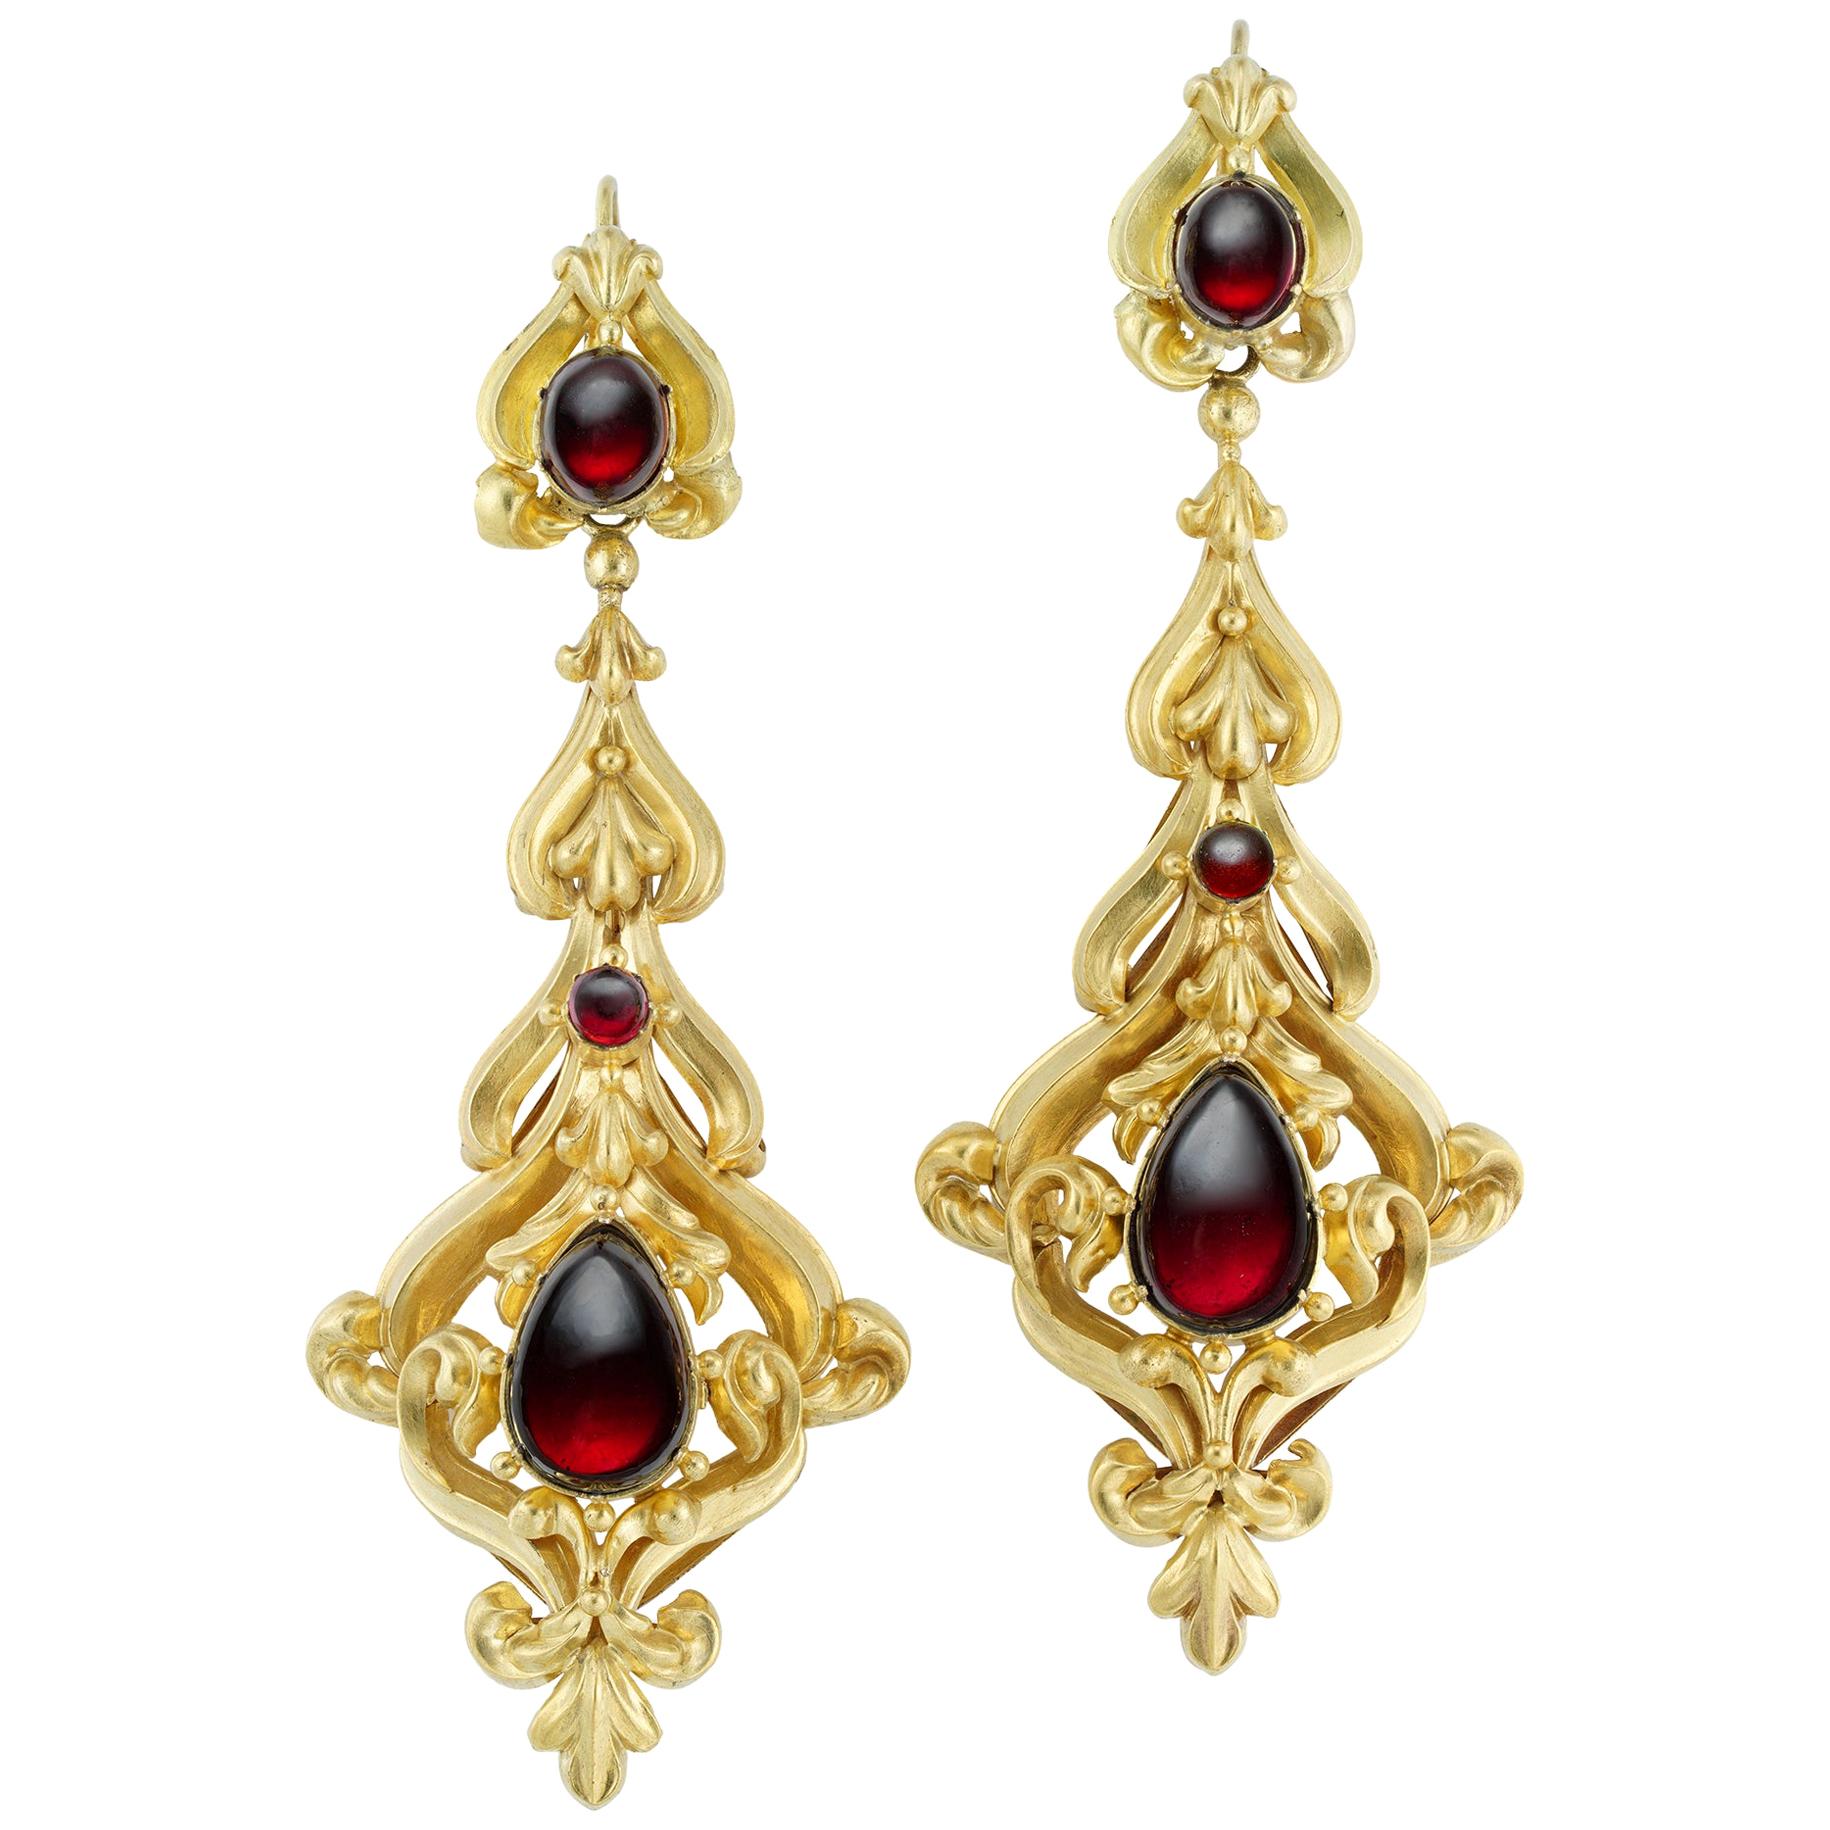 Pair of Mid-Victorian Garnet and Gold Earring